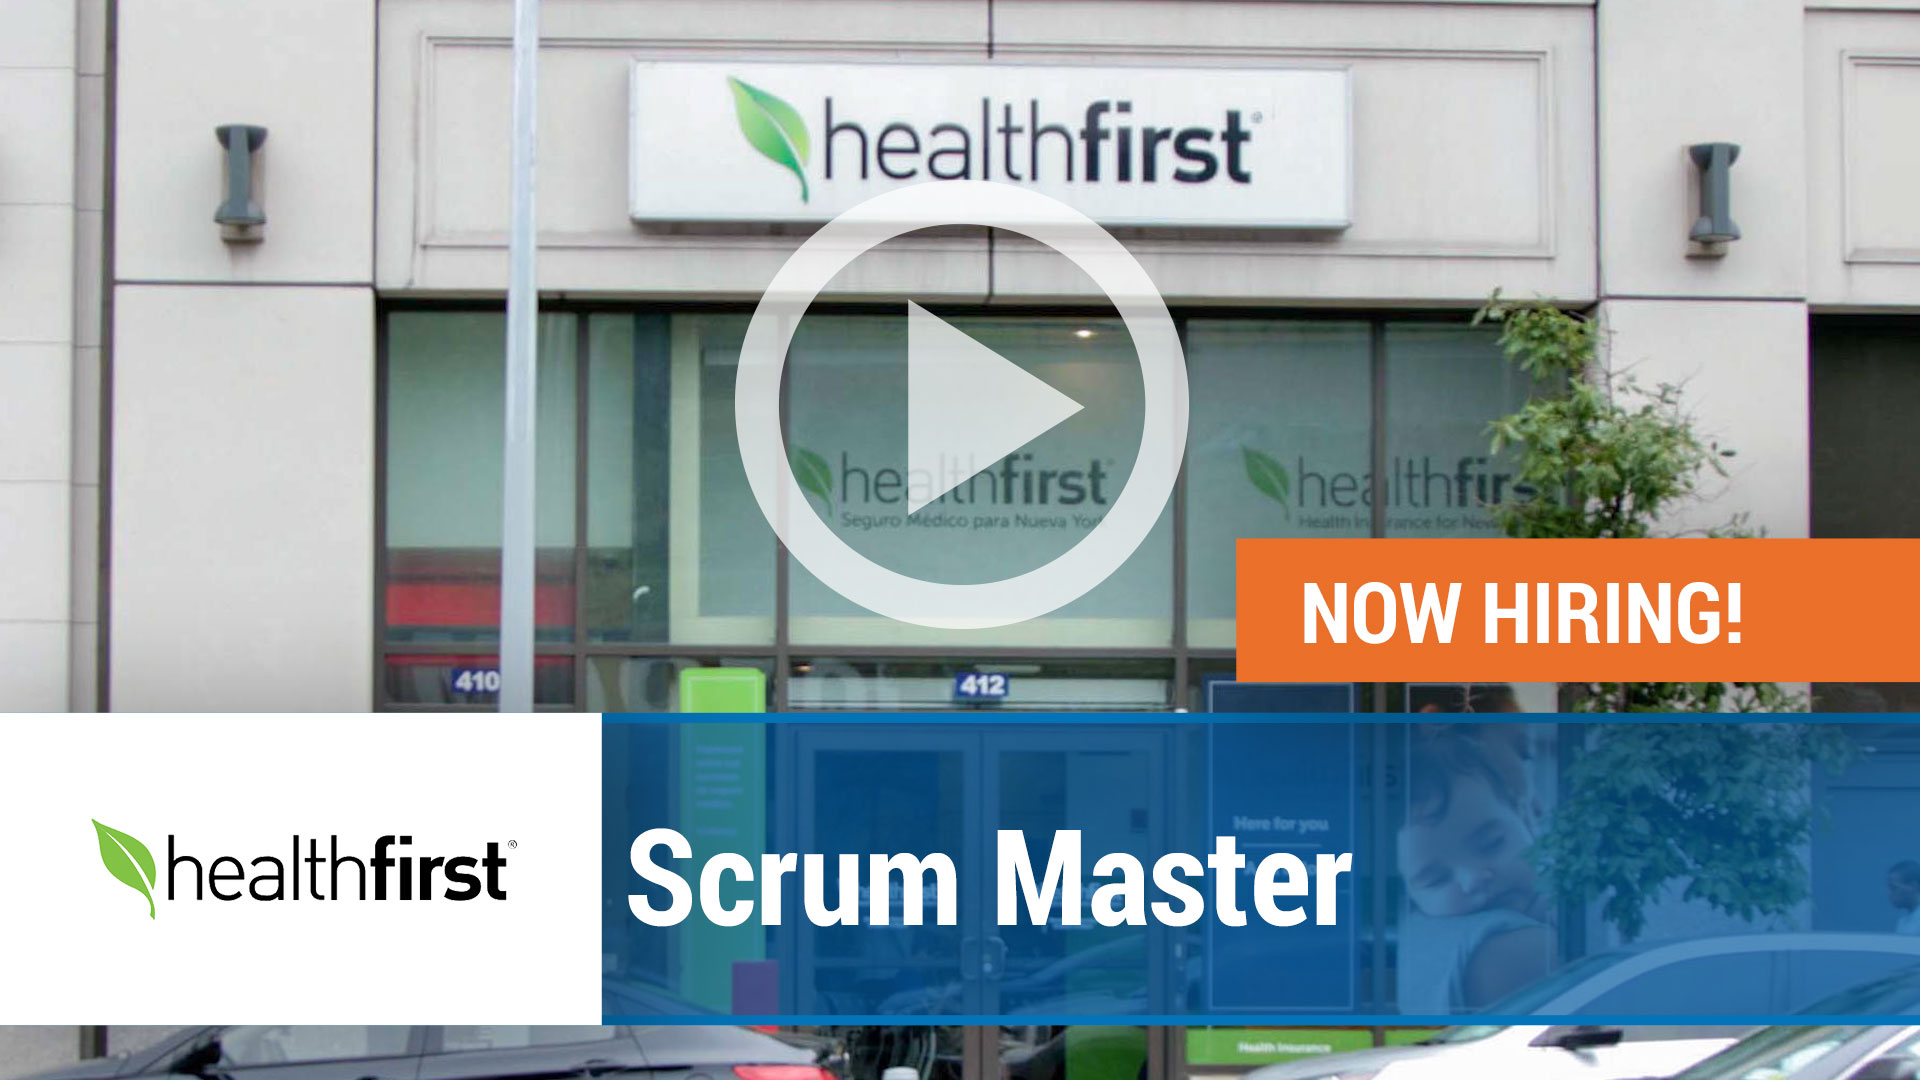 Scrum Master Job Available